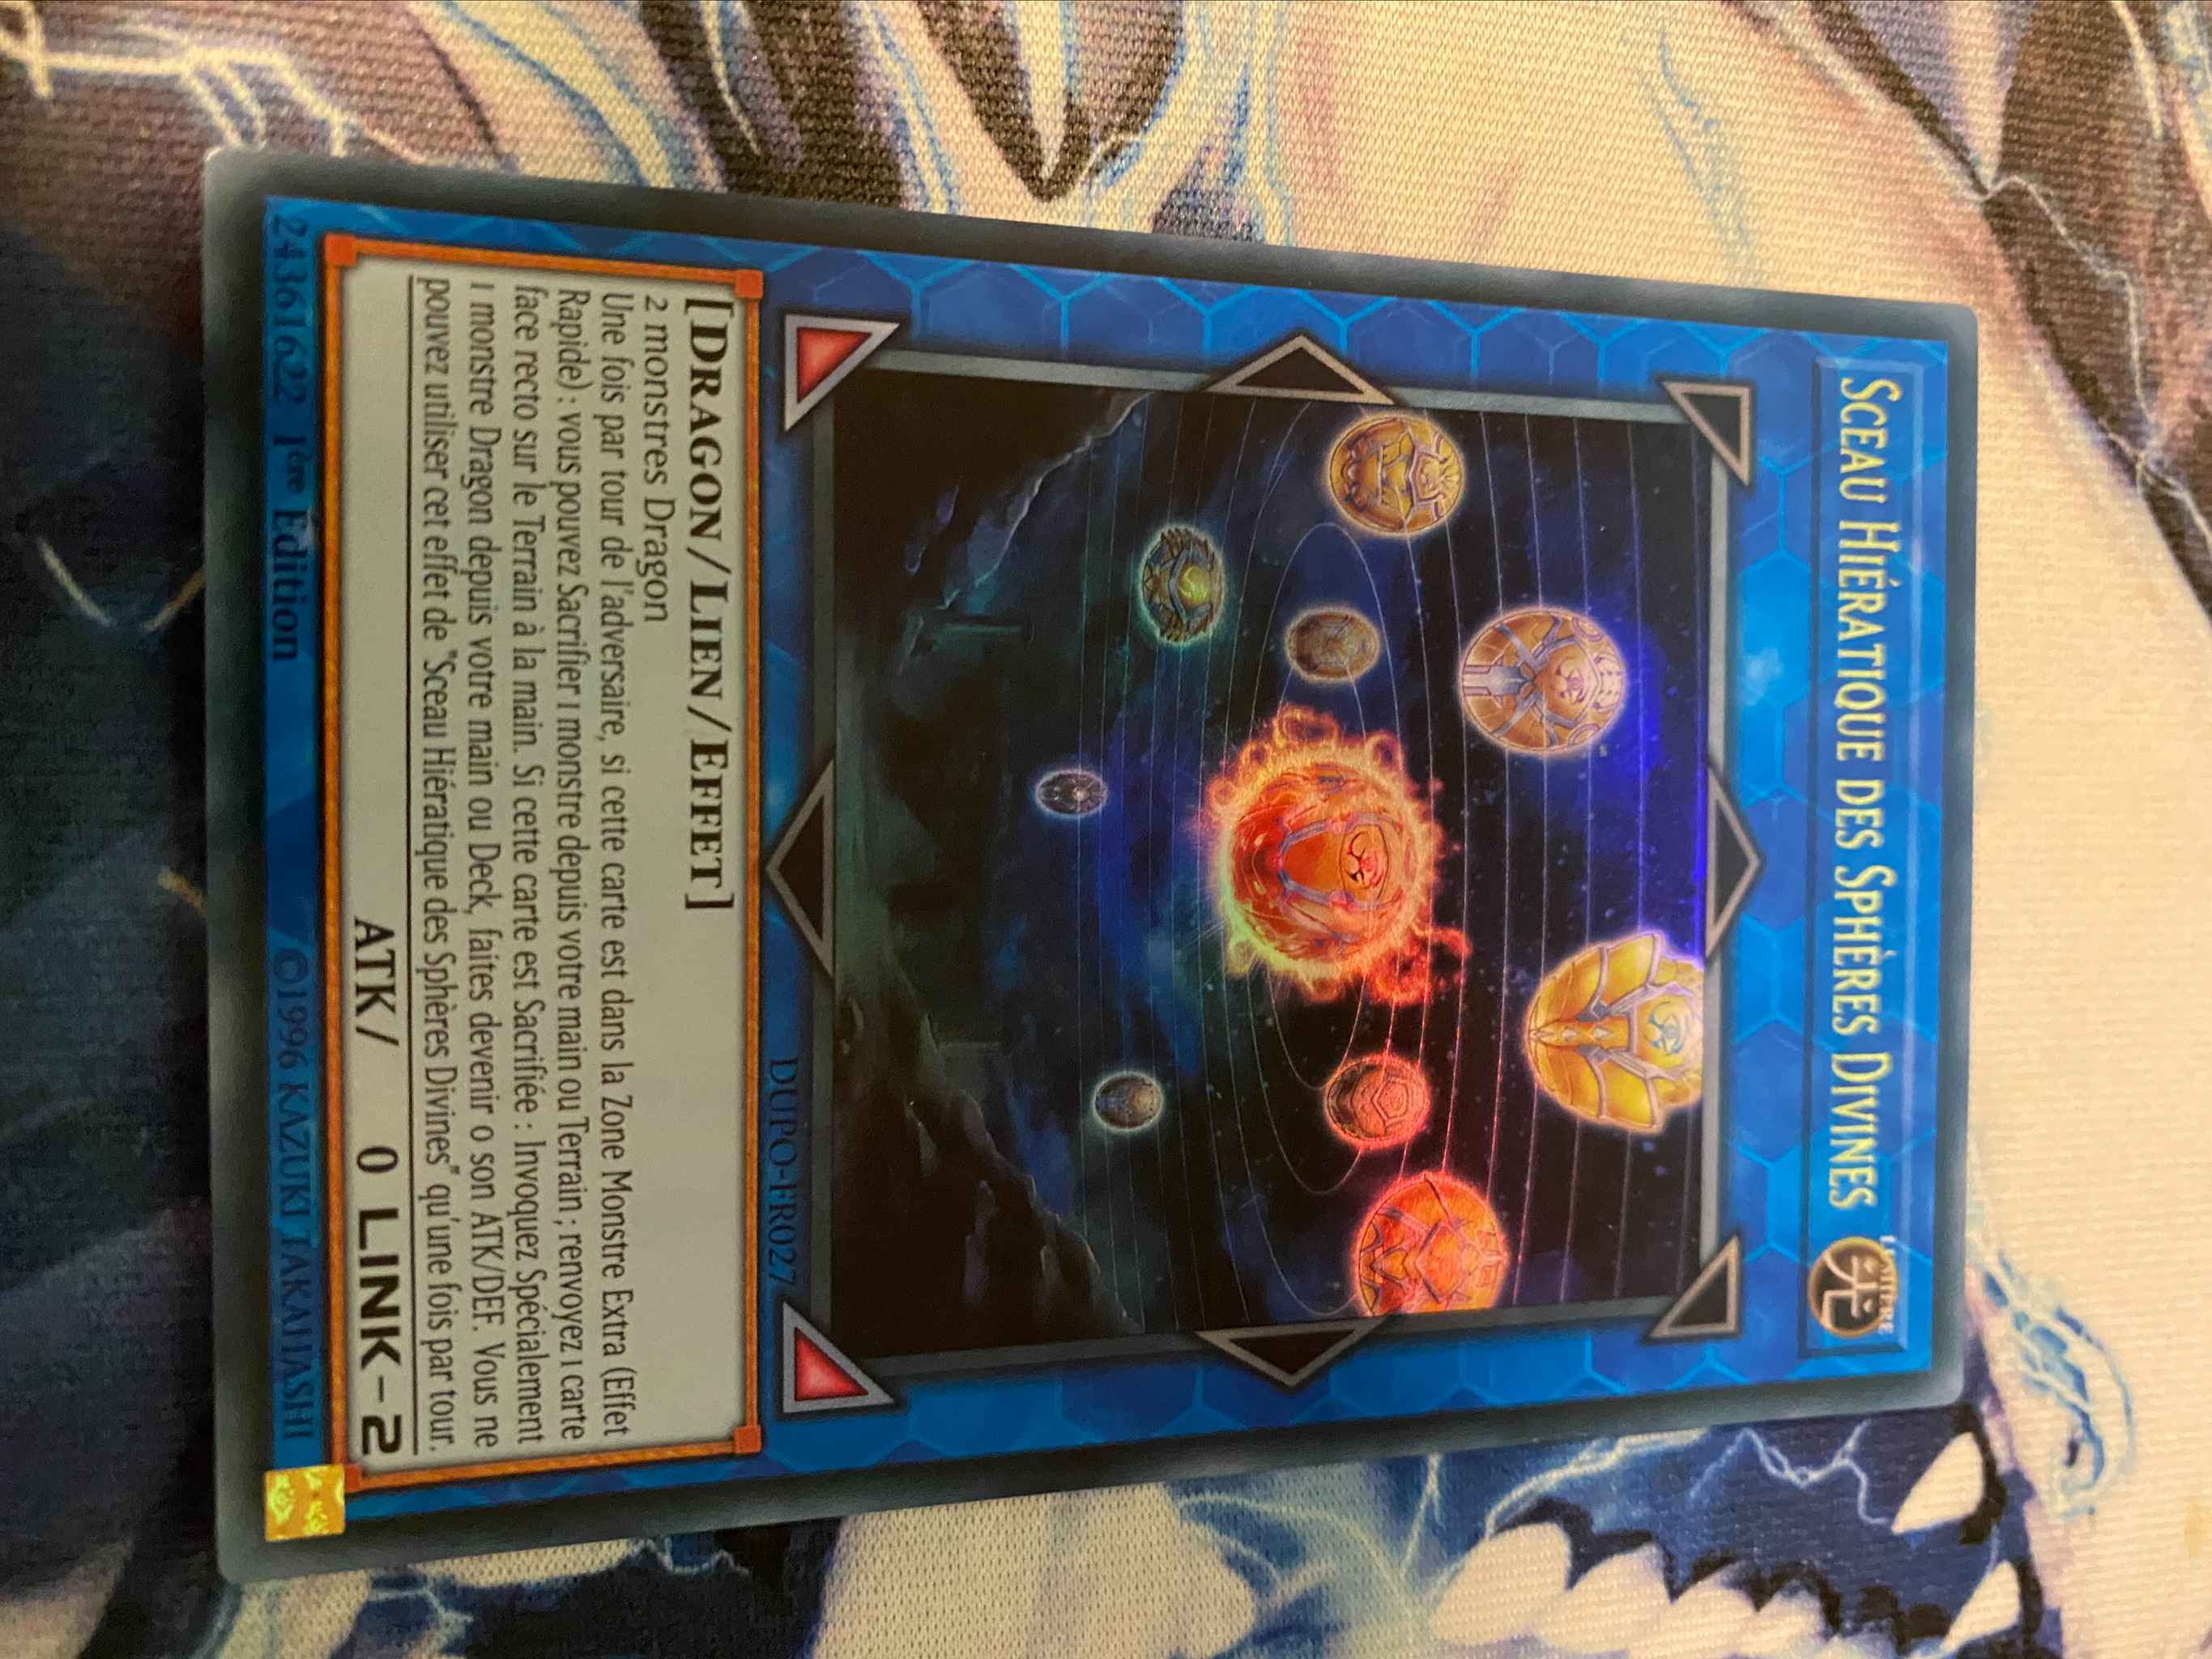 French Yugioh Hieratic Seal of the Heavenly Spheres ULTRA RARE DUPO-EN027 N/M